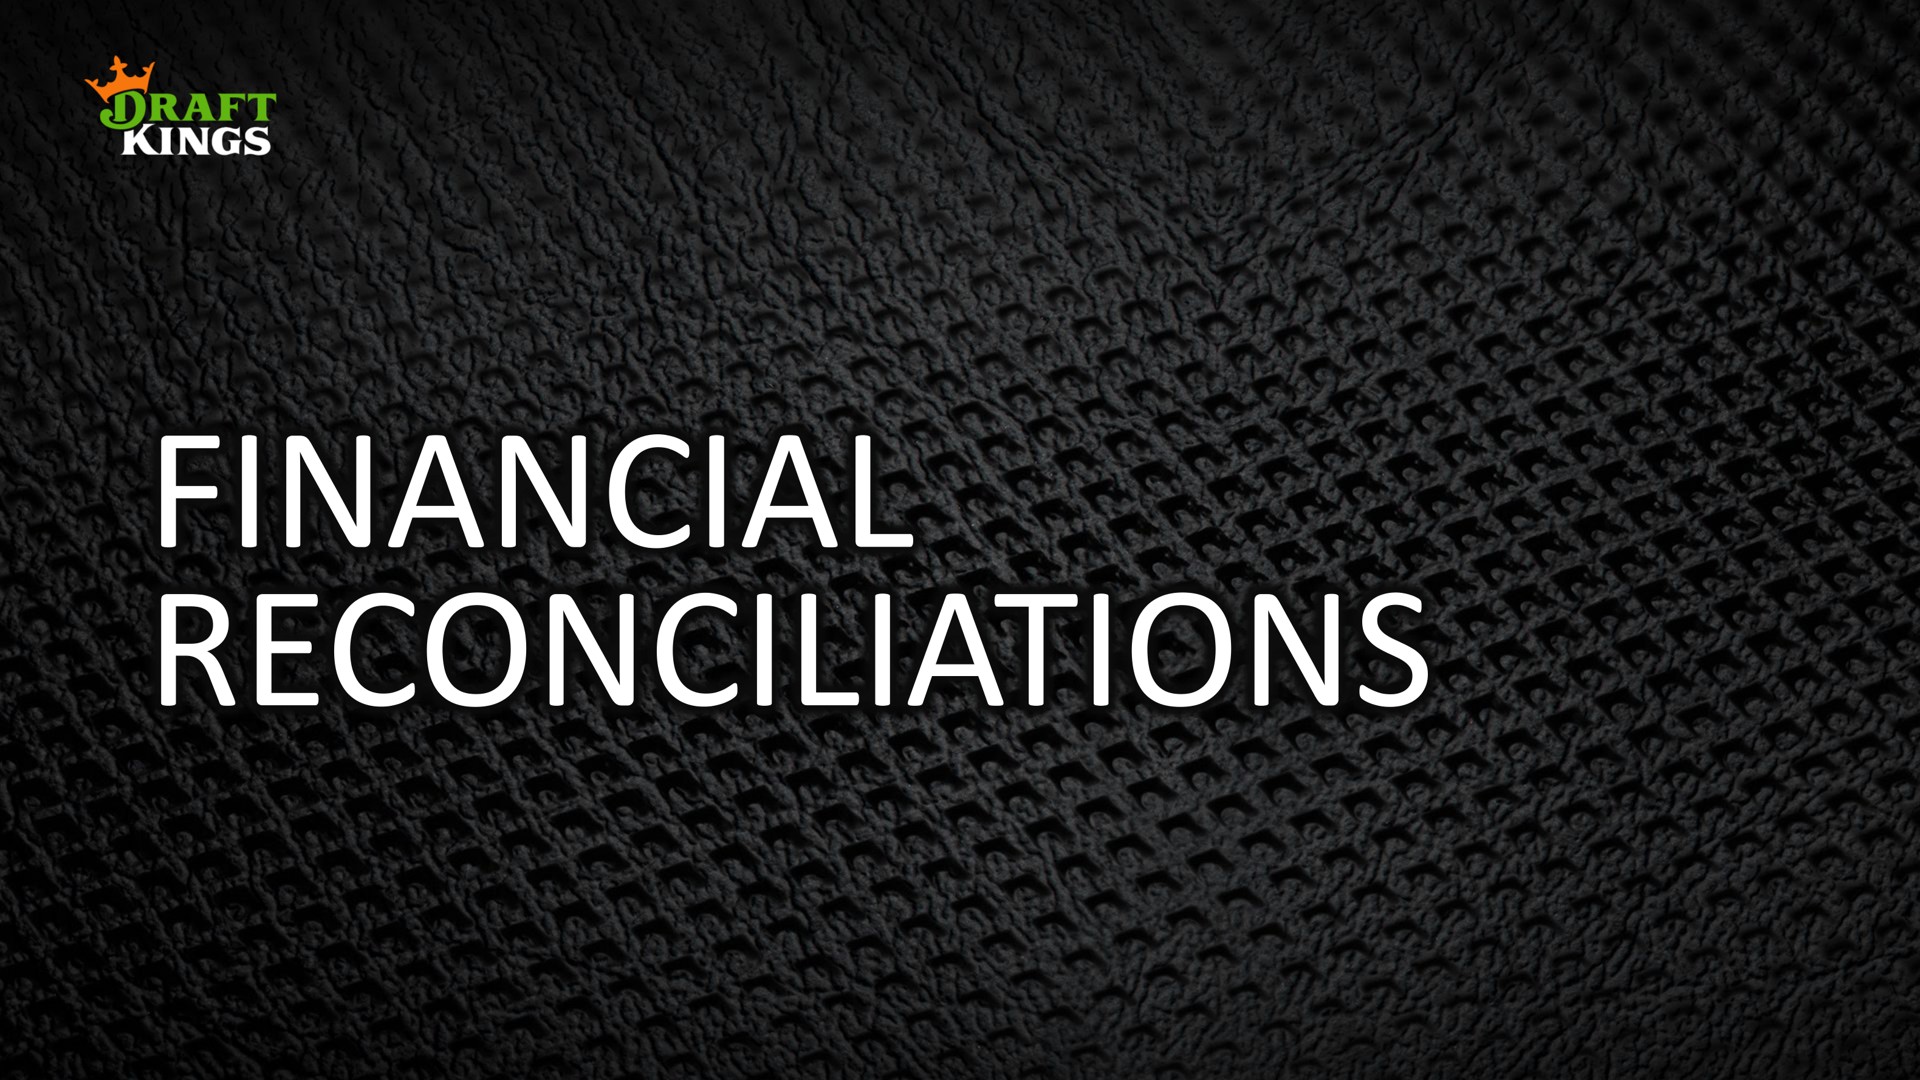 financial reconciliations | DraftKings